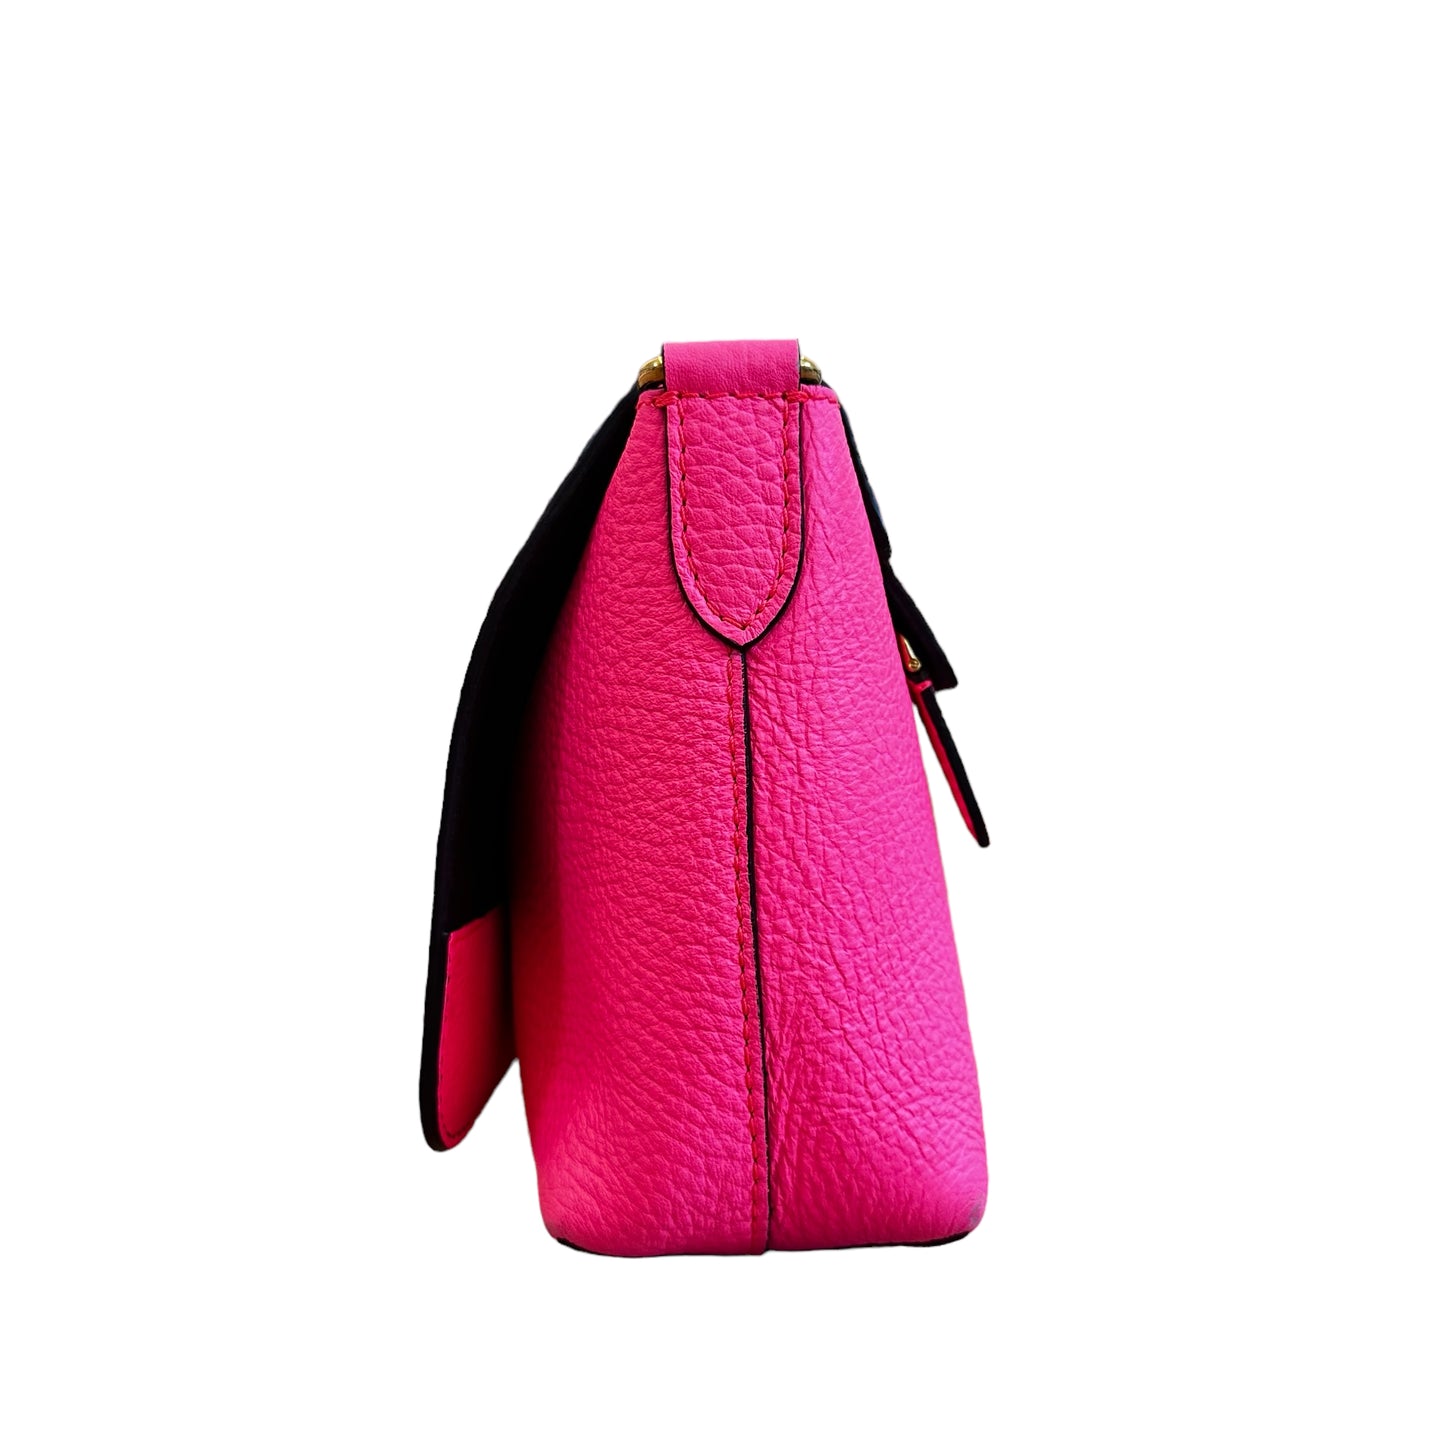 Neon Pink Leather Bag